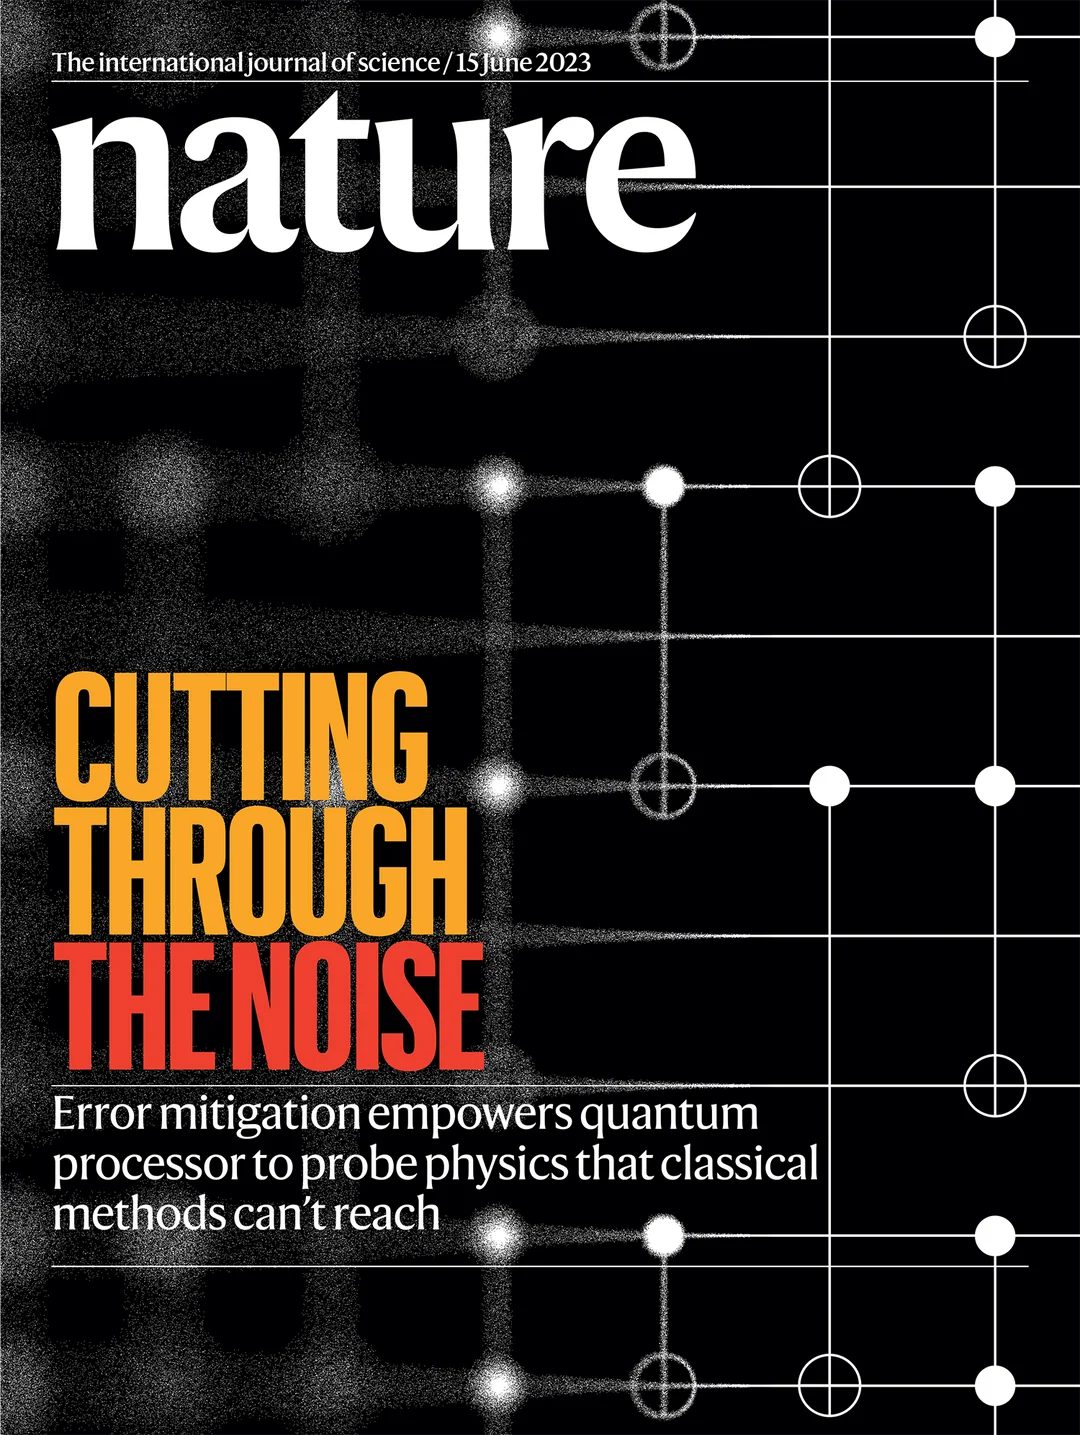 The International Journal of Science Nature cover from 6/15/23. Black with white lines and dots. Lead story "Cutting through the noise: error mitigation empowers quantum processor to probe physics that classical methods can't reach."